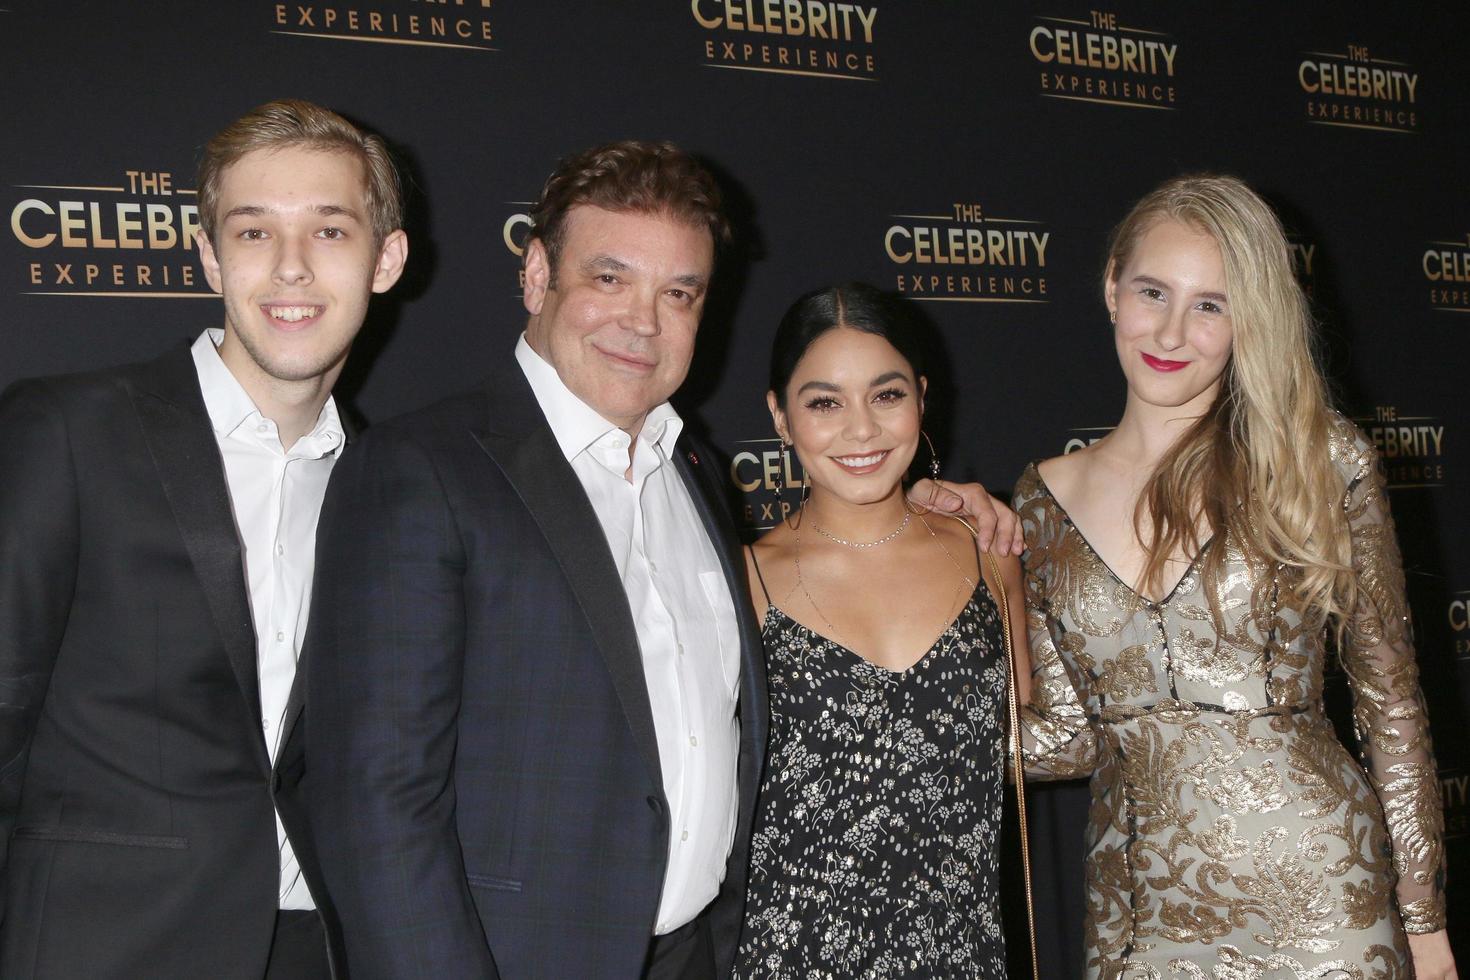 LOS ANGELES - AUG 12 - Son, George Caceres, Vanessa Hudgens, Daughter at the The Celebrity Experience at the Universal Hilton Hotel on August 12, 2018 in Universal City, CA photo